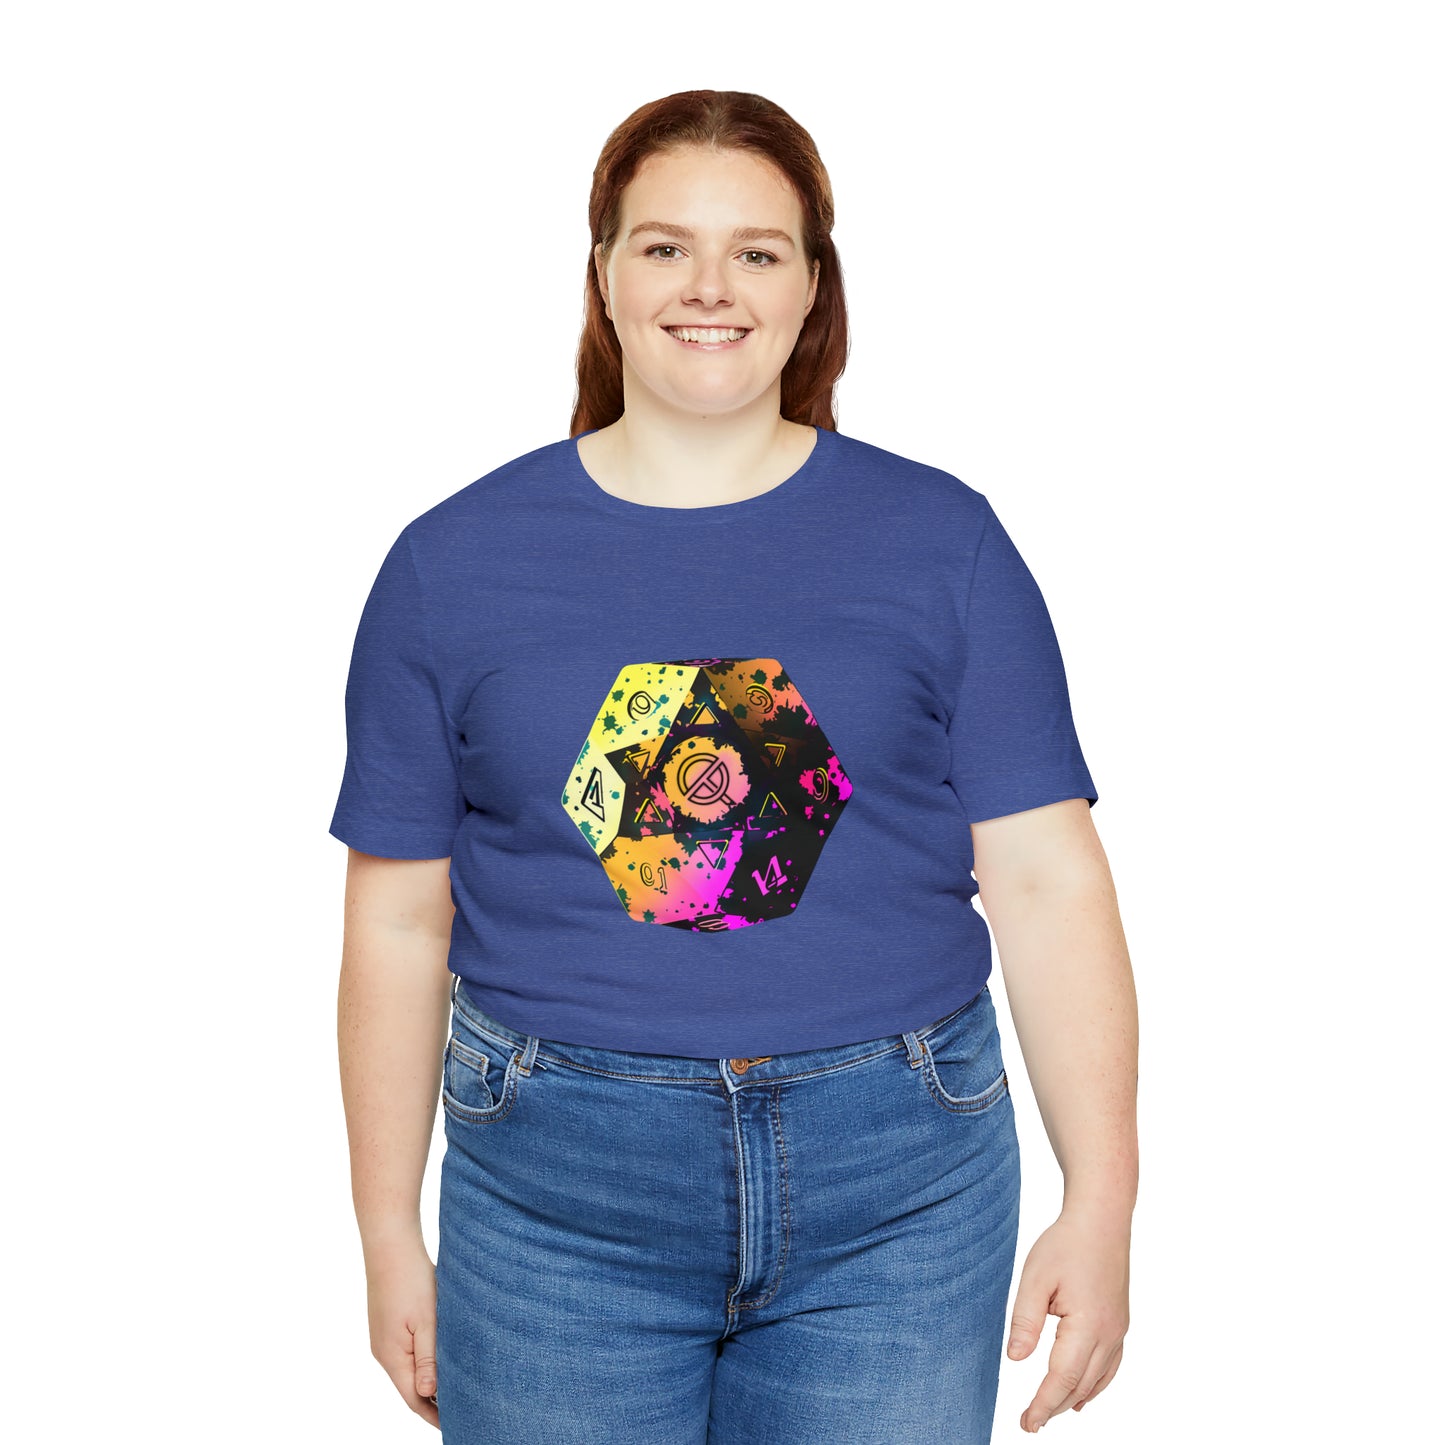 heather-true-royal-quest-thread-tee-shirt-with-large-neon-d20-dice-on-center